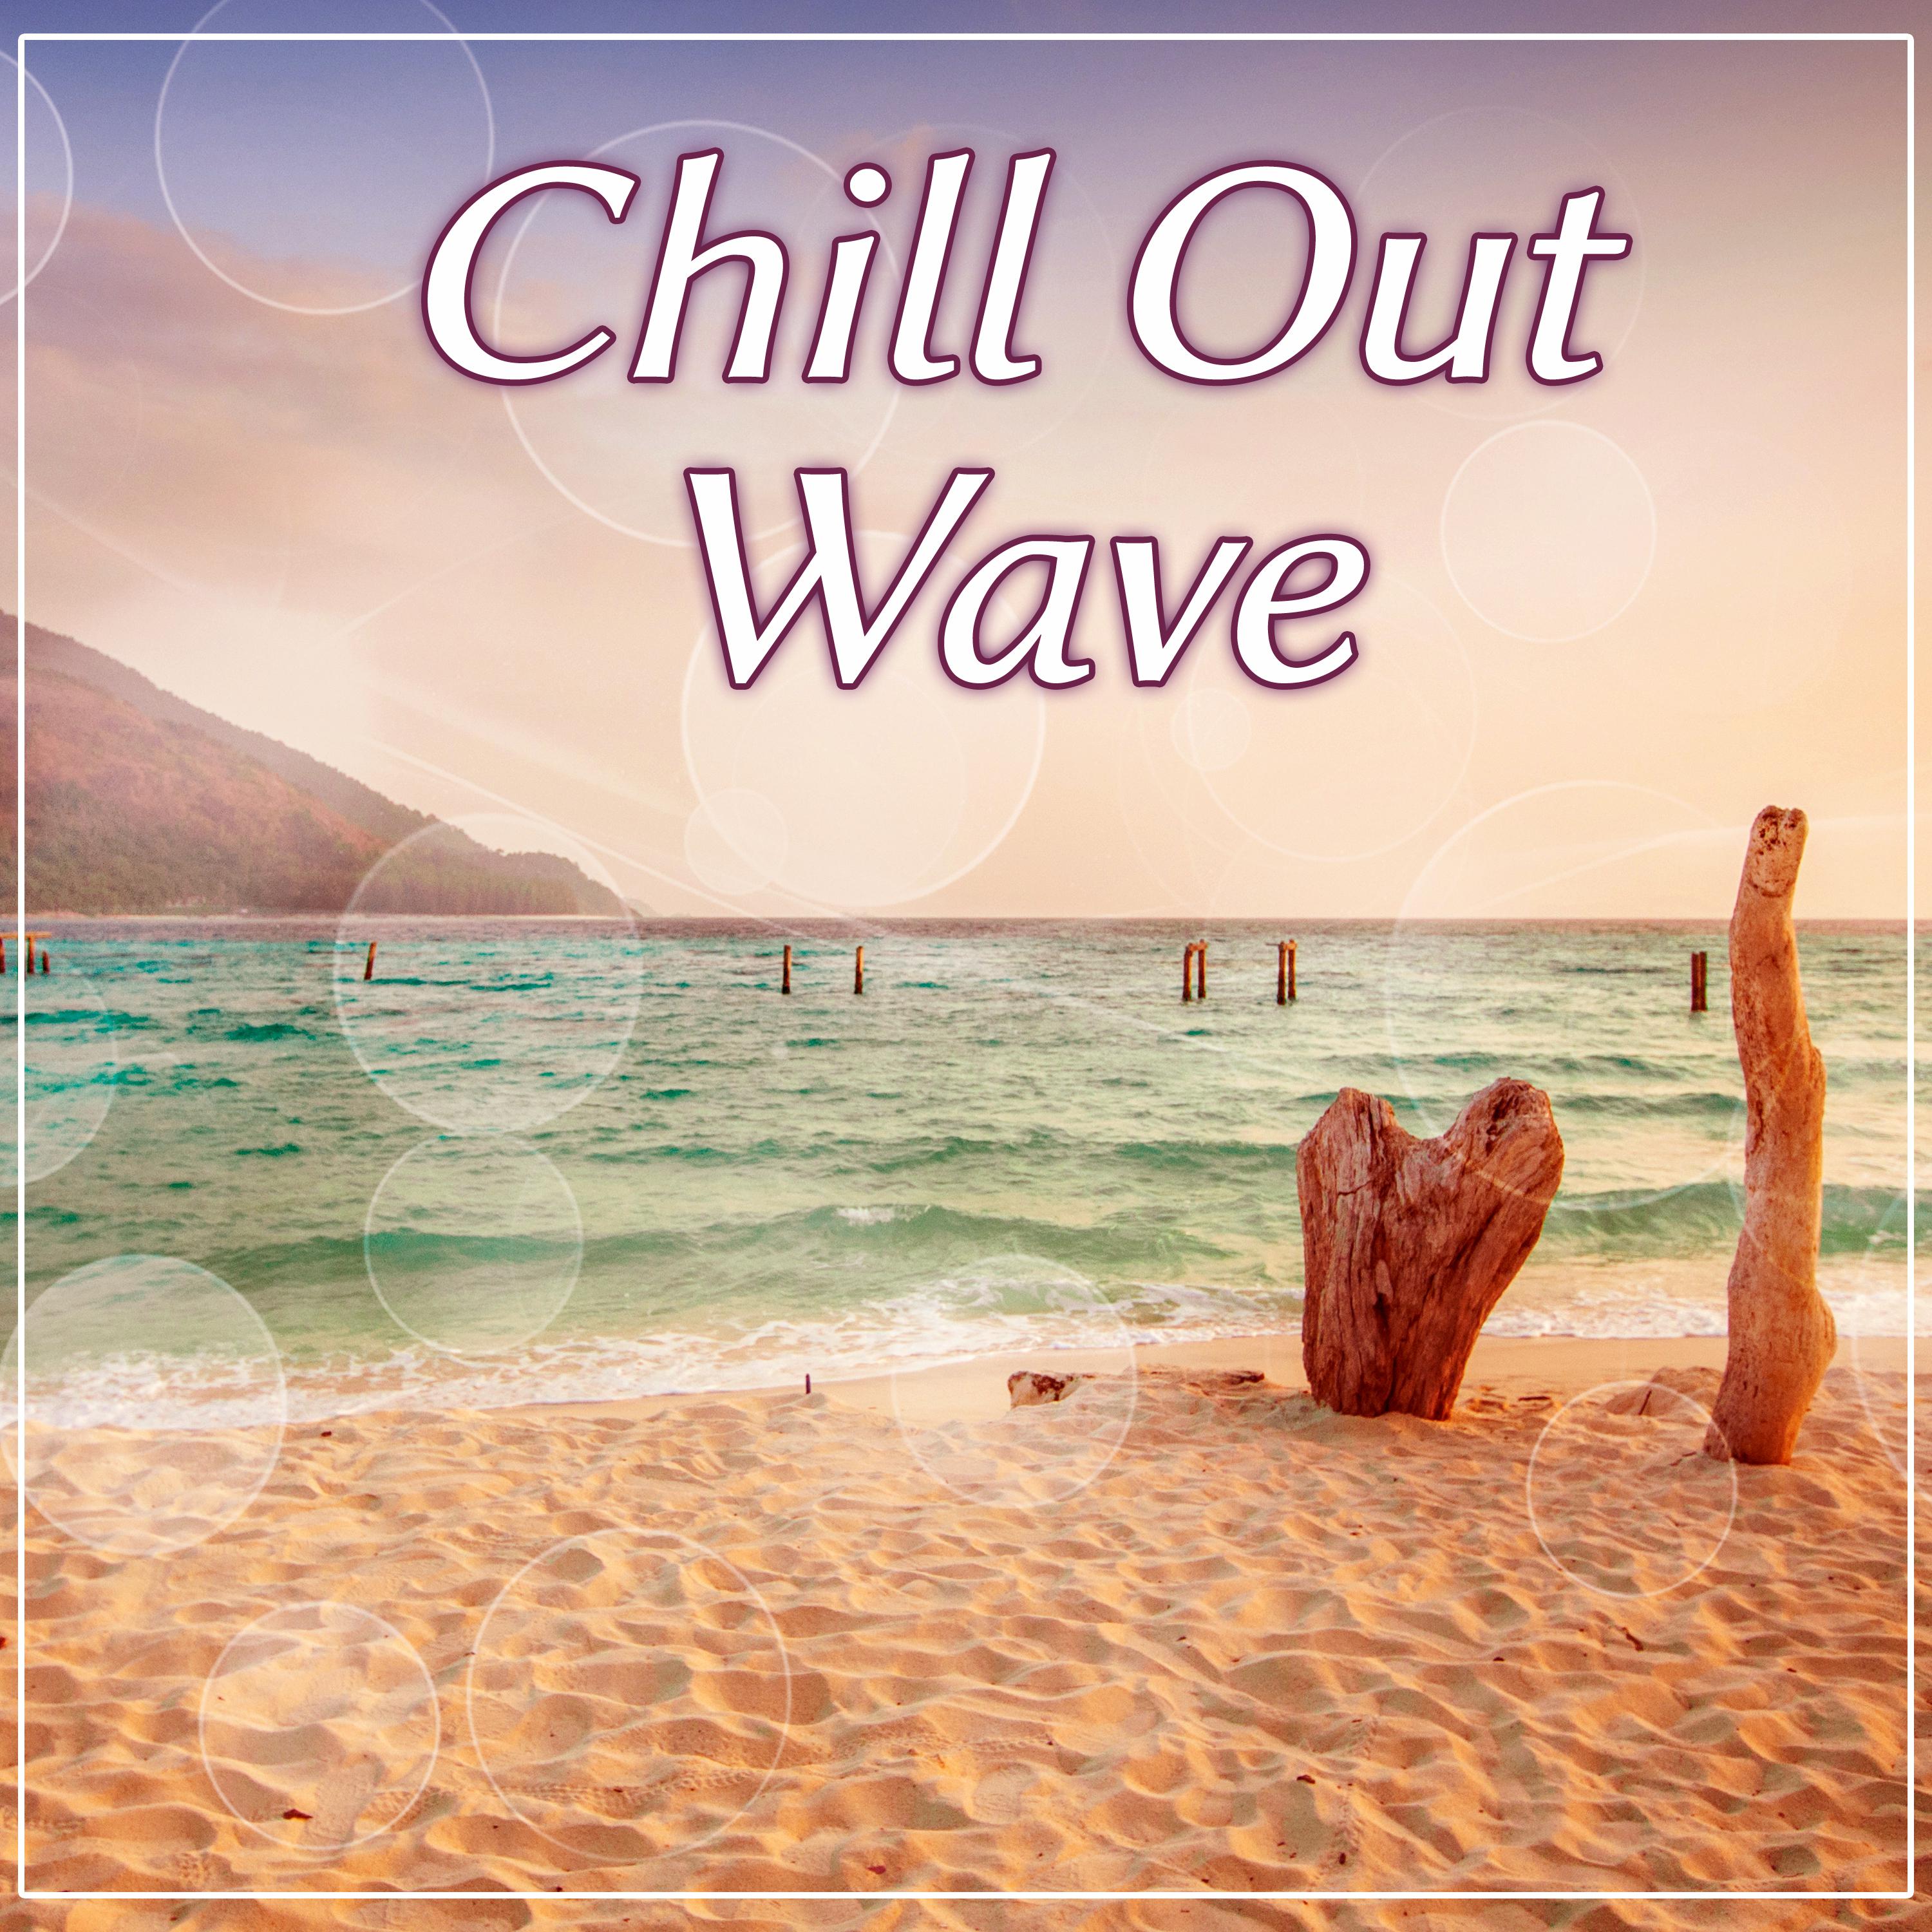 Chill Out Wave  Summer Hits of Chill Out Music, Ocean Waves, Sexy Chill Out, Beach Music, Chill Lounge, Ocean Dreams, Chill Out Lounge